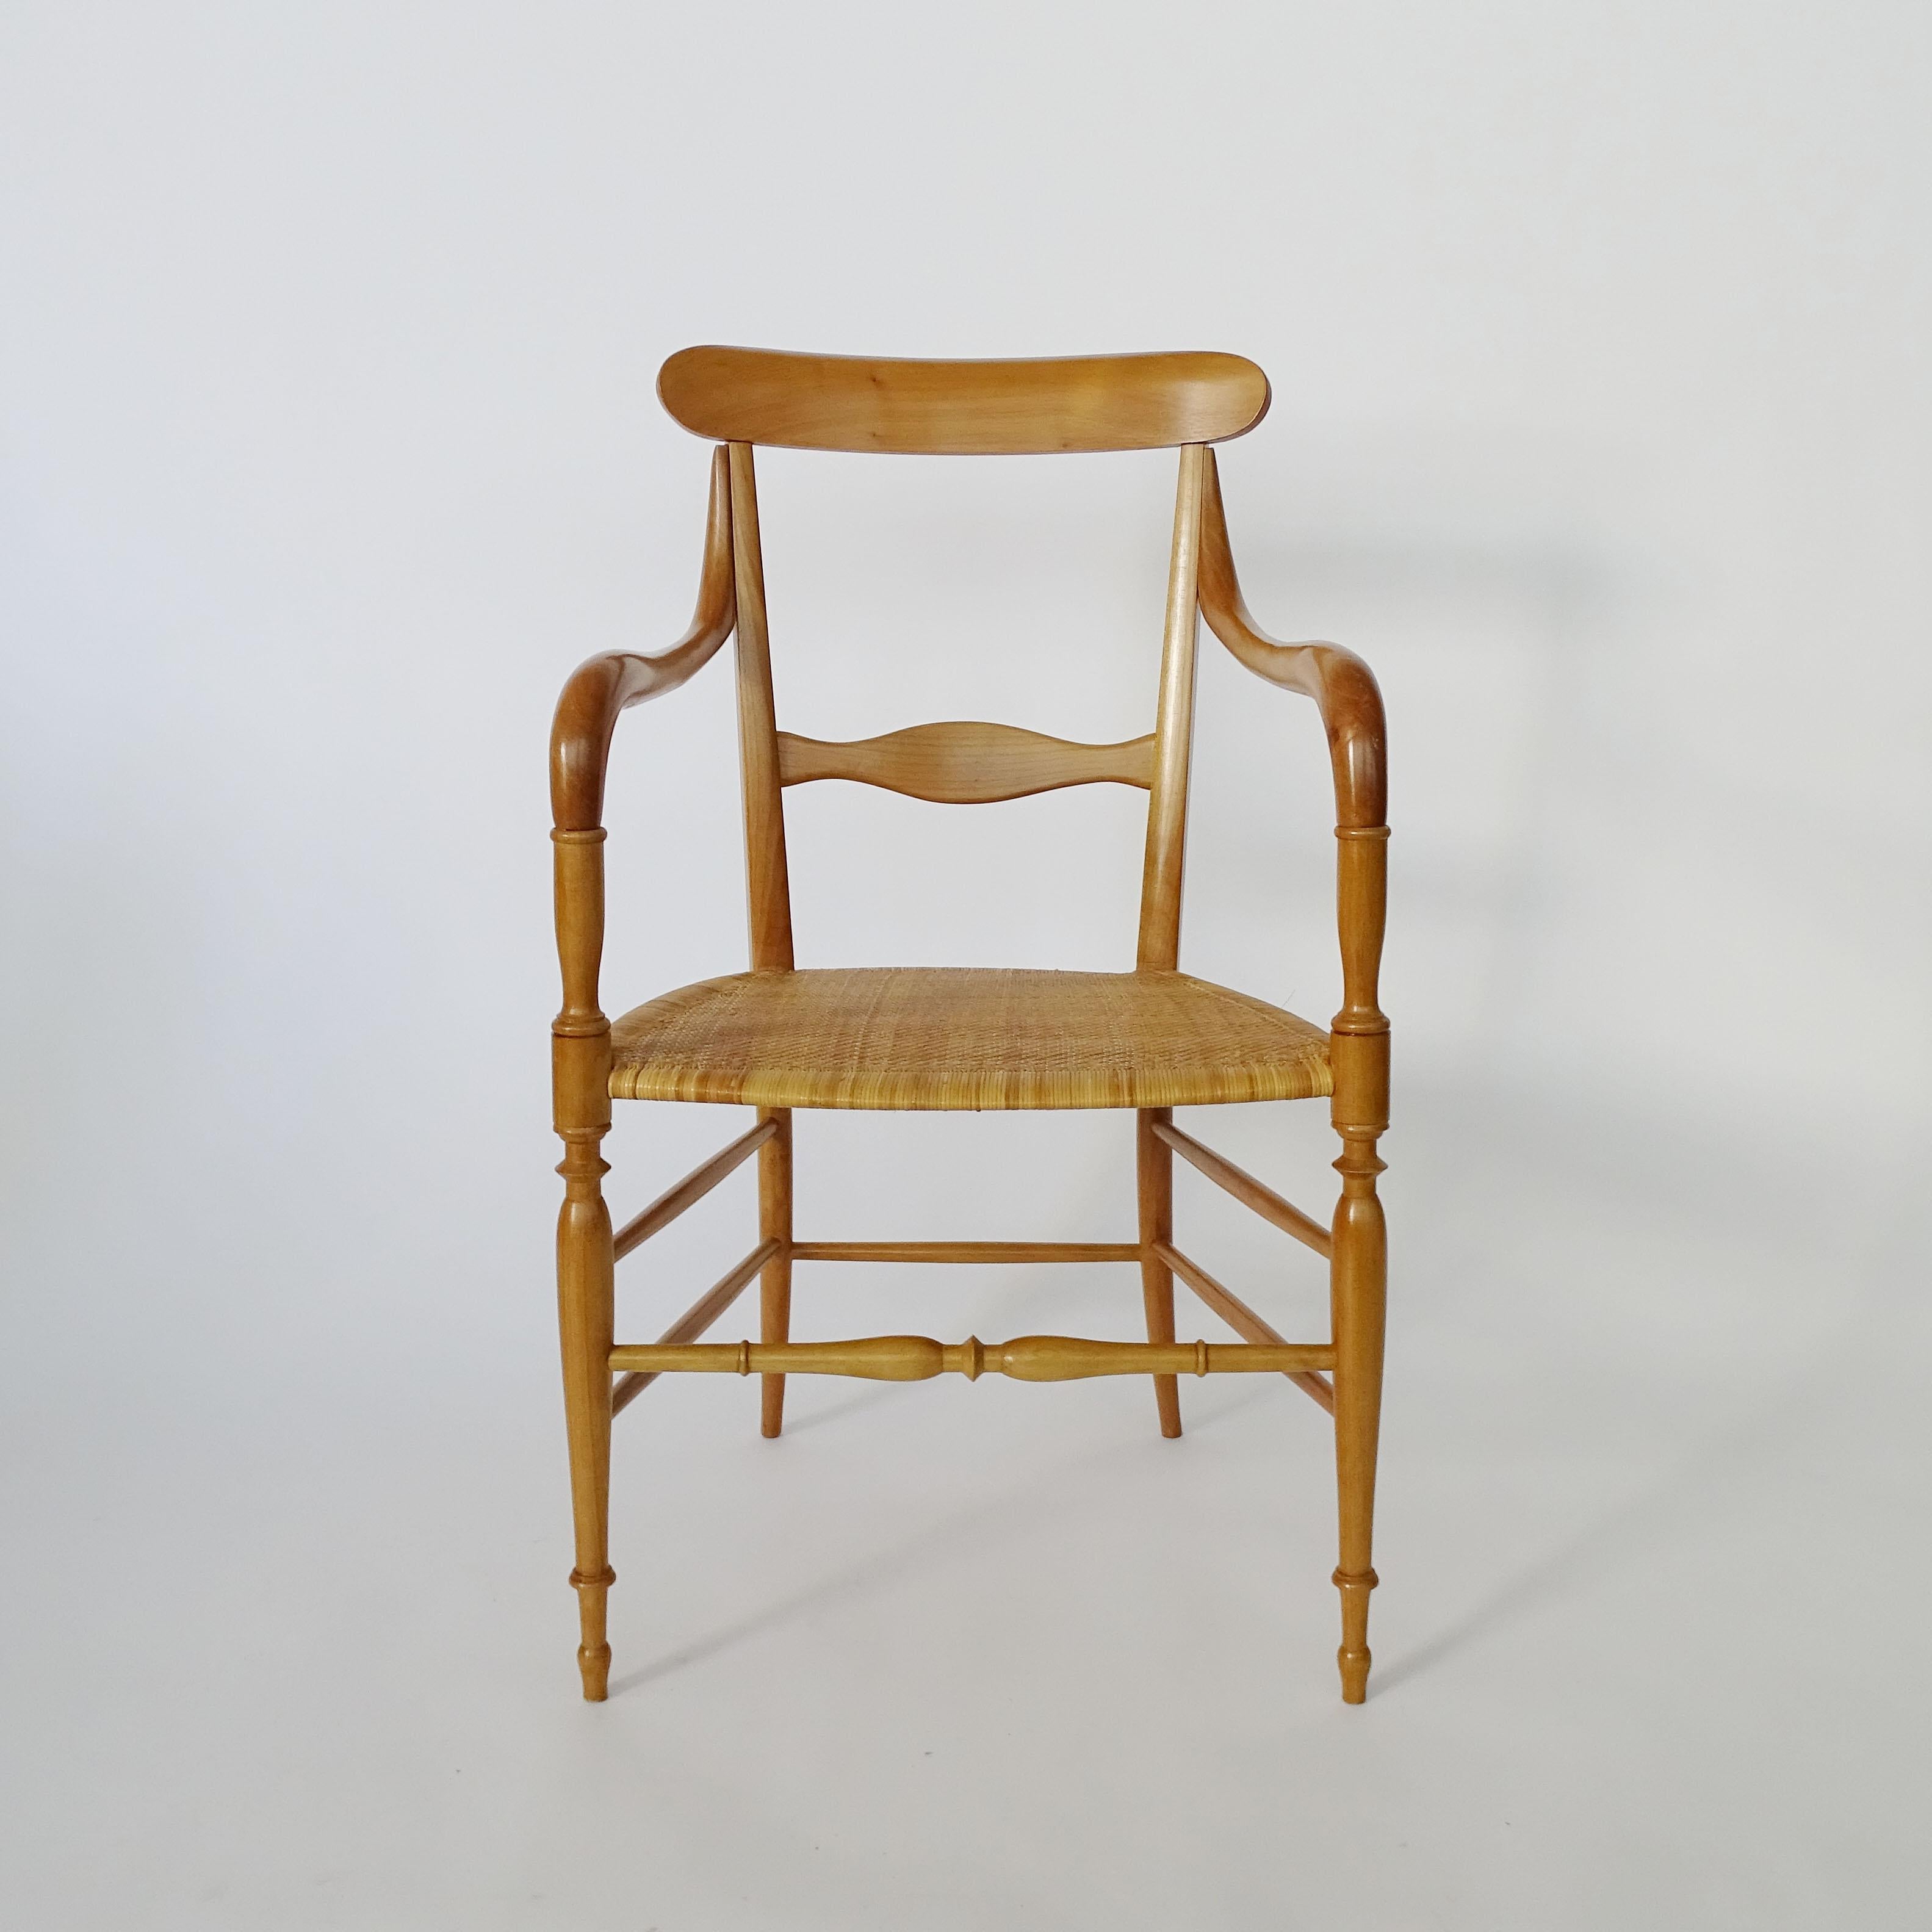 Pair of Chiavari Armchairs in wood and cane.
Beautifully kept.
Italy 1960s.